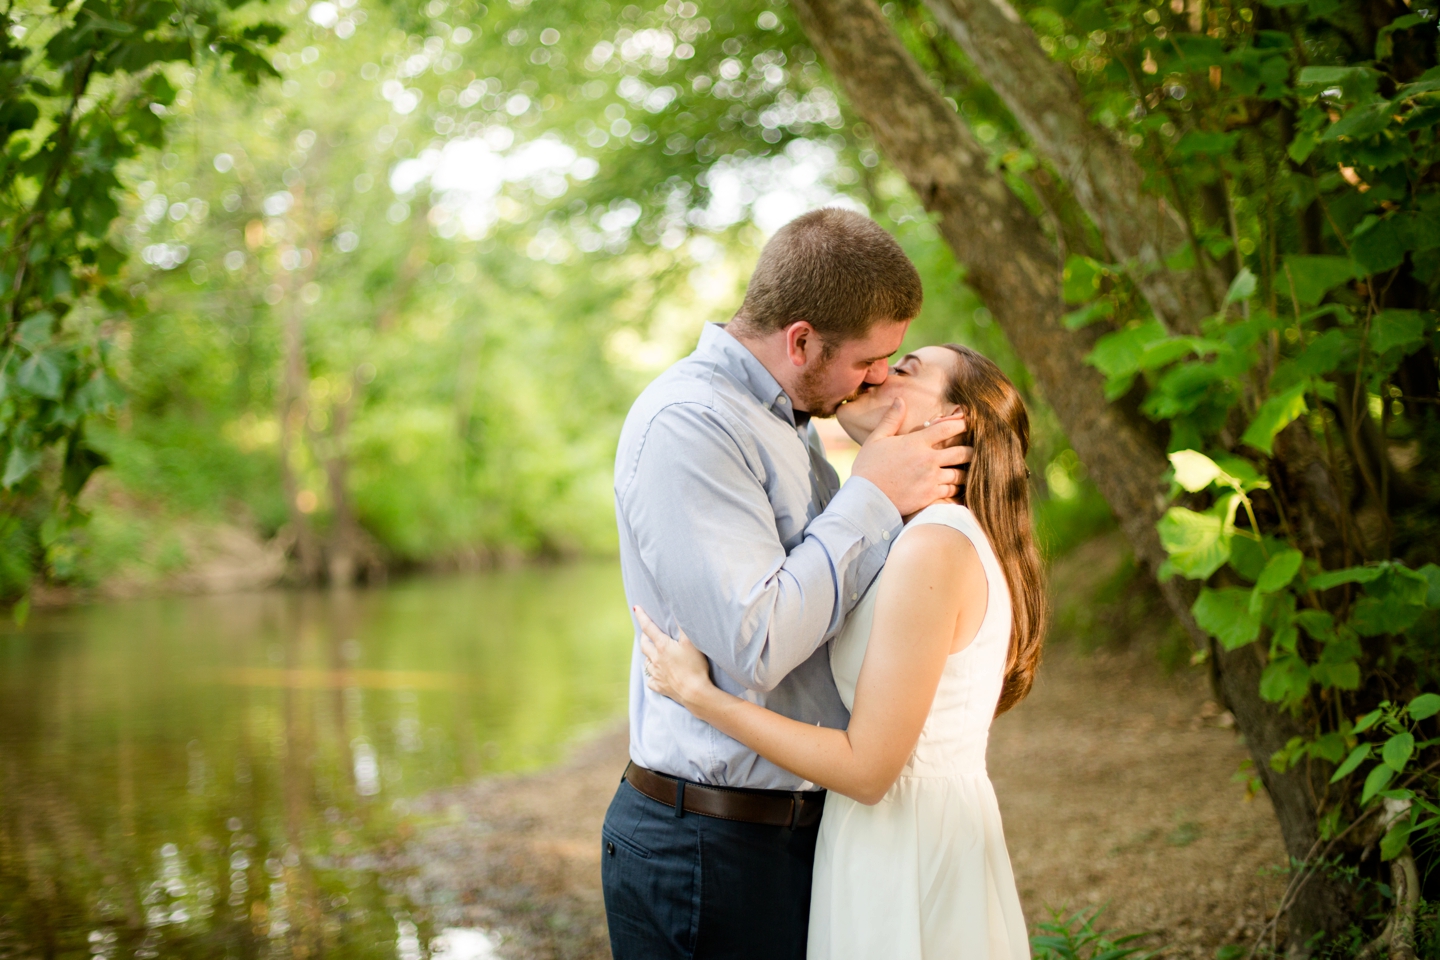 Engagement Sessions, For Brides, The Importance of Engagement Sessions, Jessica Lauren 